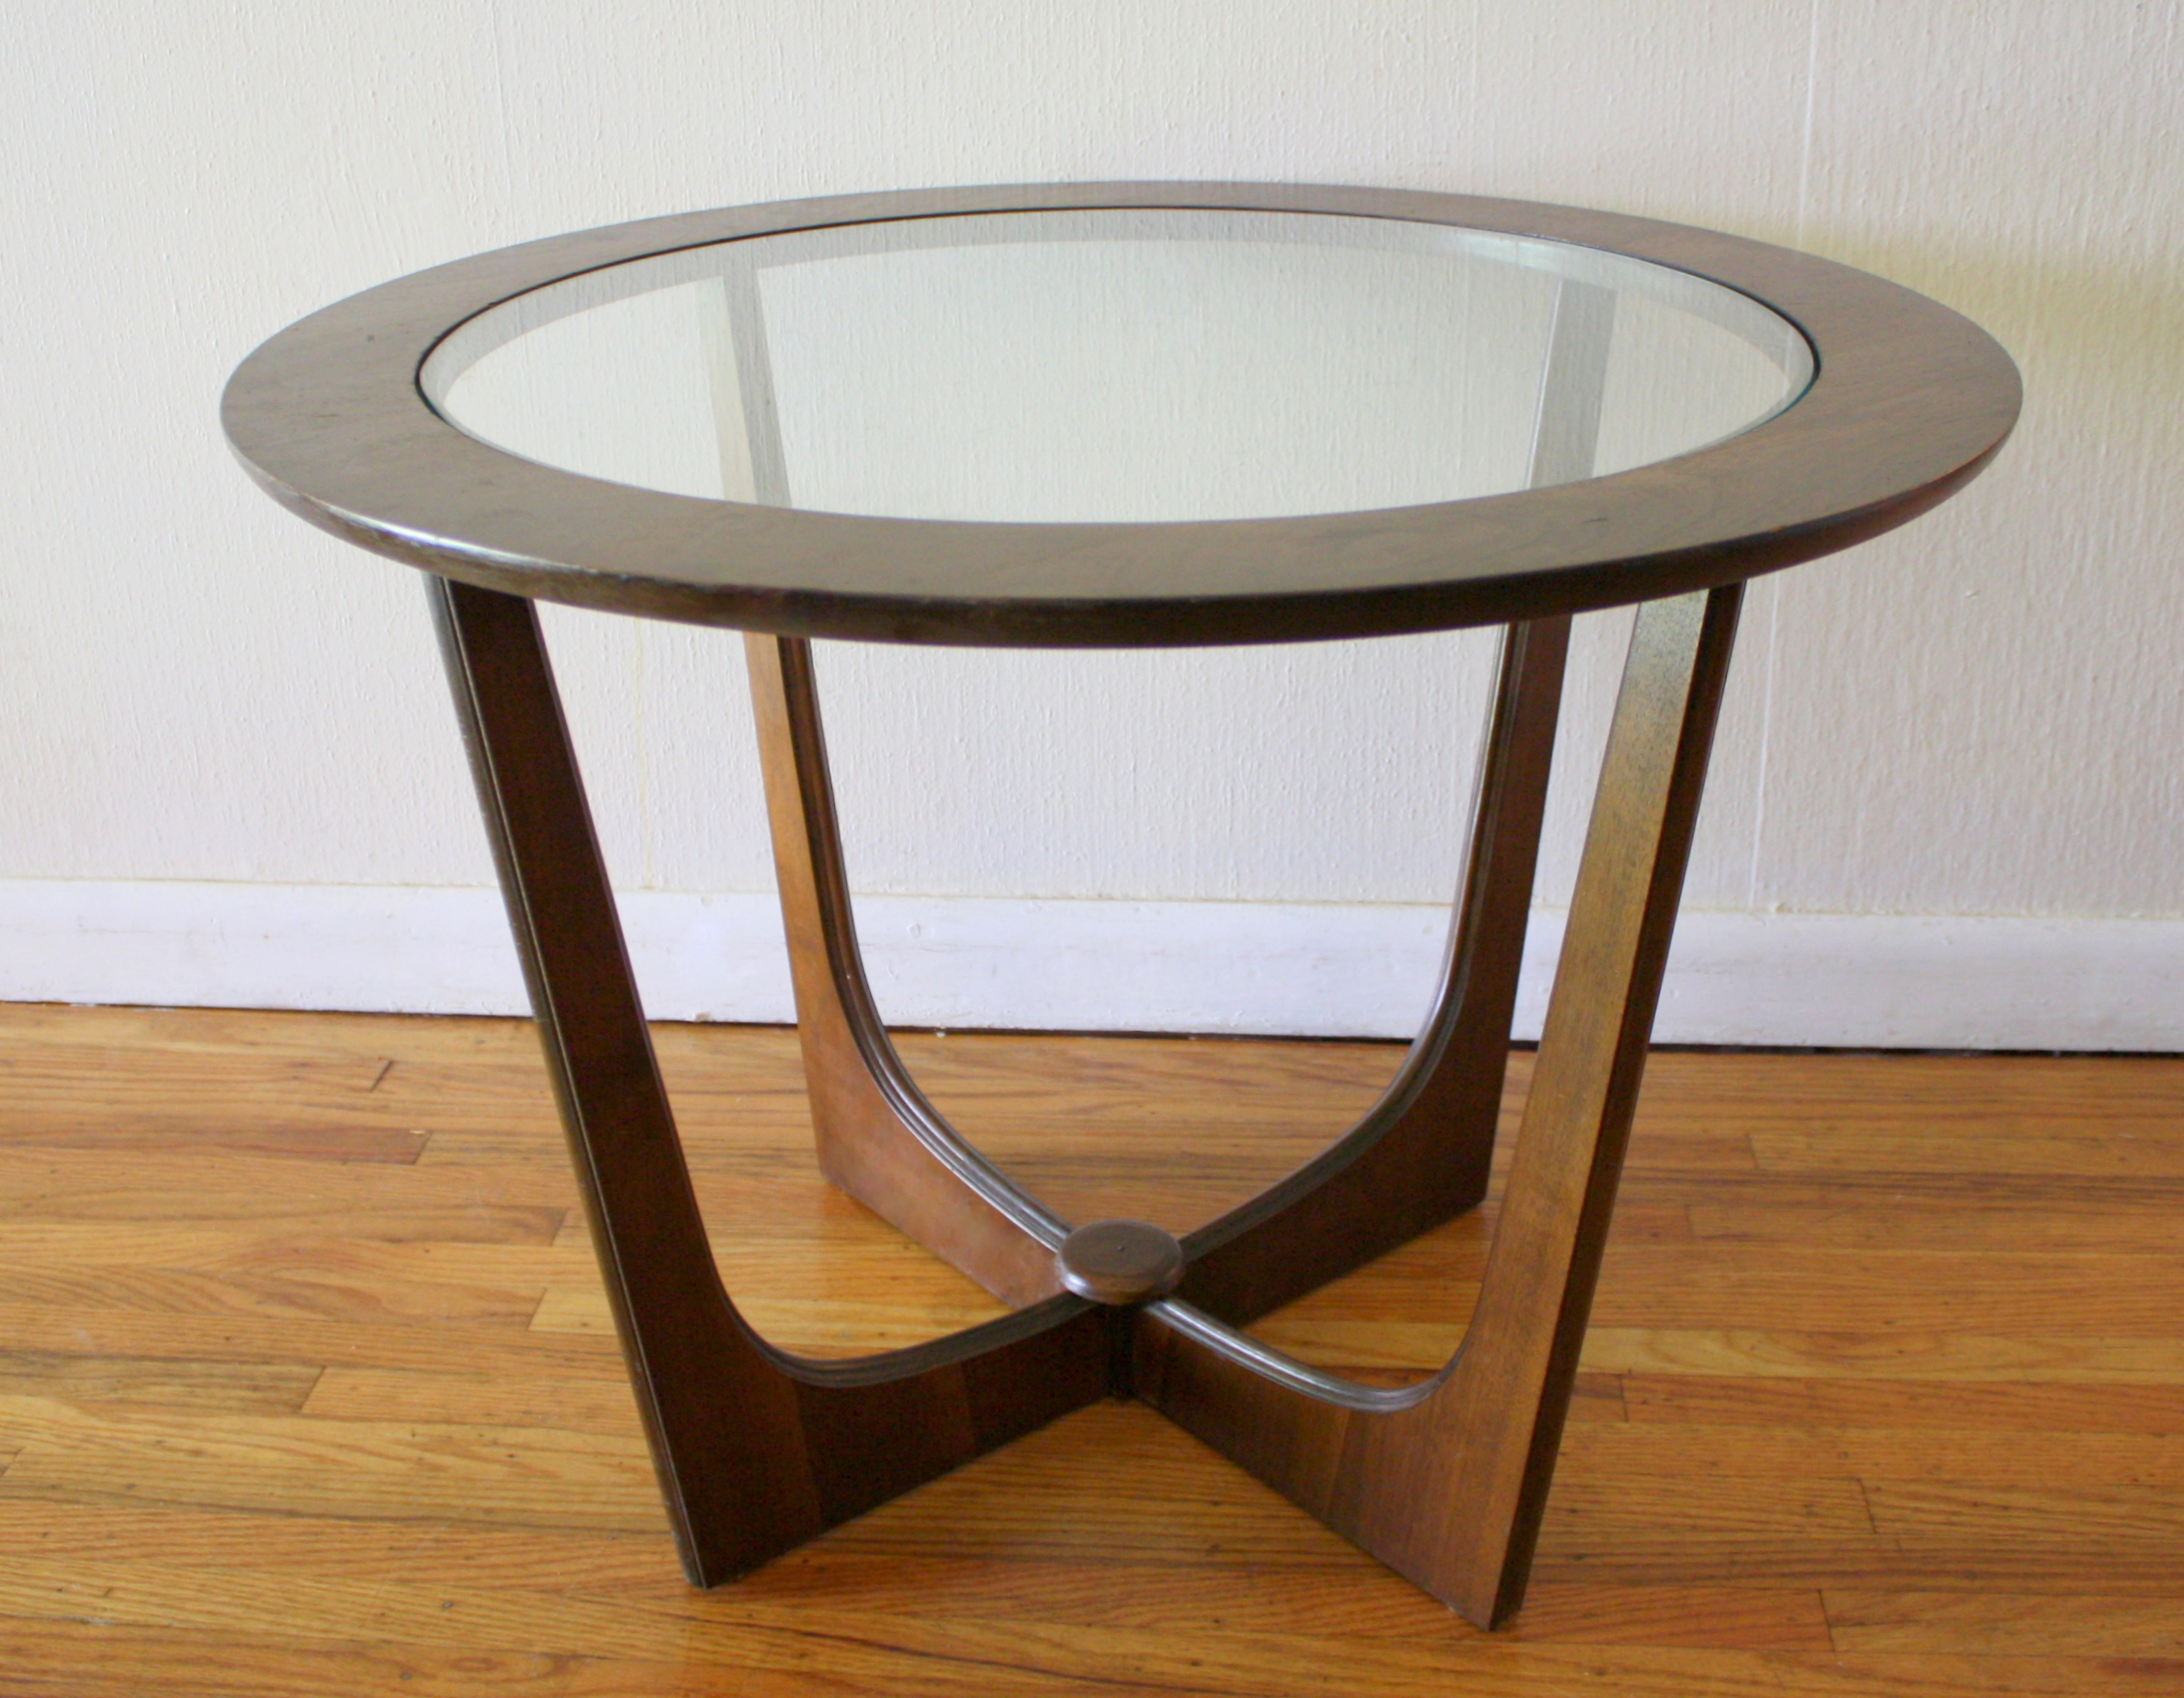 white accent table the perfect cool design end small round glass top tables material brown finish unique coffee idea modern solid wood shape natural edge and black side broyhill